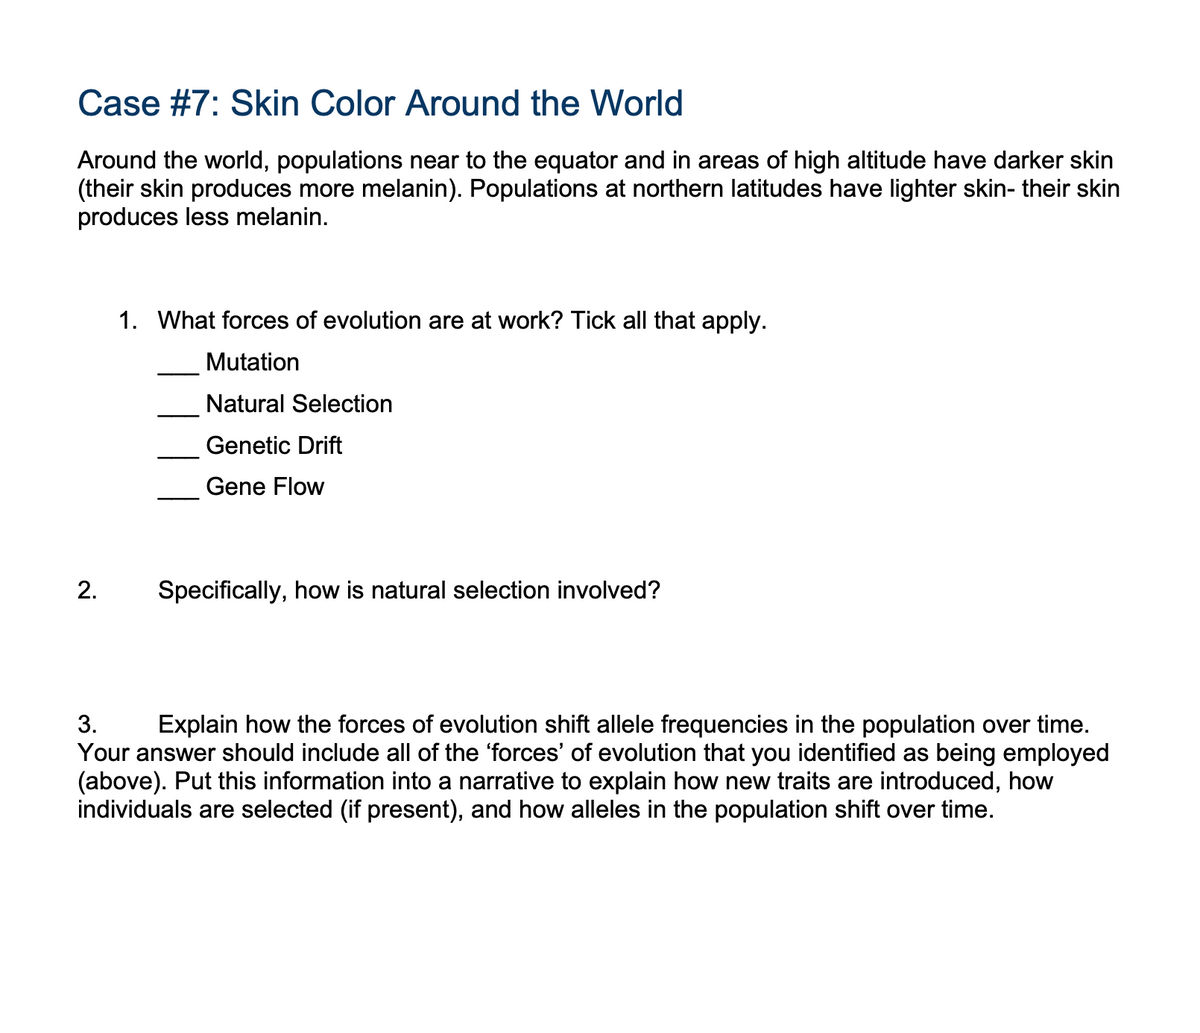 Case #7: Skin Color Around the World
Around the world, populations near to the equator and in areas of high altitude have darker skin
(their skin produces more melanin). Populations at northern latitudes have lighter skin- their skin
produces less melanin.
2.
1. What forces of evolution are at work? Tick all that apply.
Mutation
Natural Selection
Genetic Drift
Gene Flow
Specifically, how is natural selection involved?
3.
Explain how the forces of evolution shift allele frequencies in the population over time.
Your answer should include all of the 'forces' of evolution that you identified as being employed
(above). Put this information into a narrative to explain how new traits are introduced, how
individuals are selected (if present), and how alleles in the population shift over time.